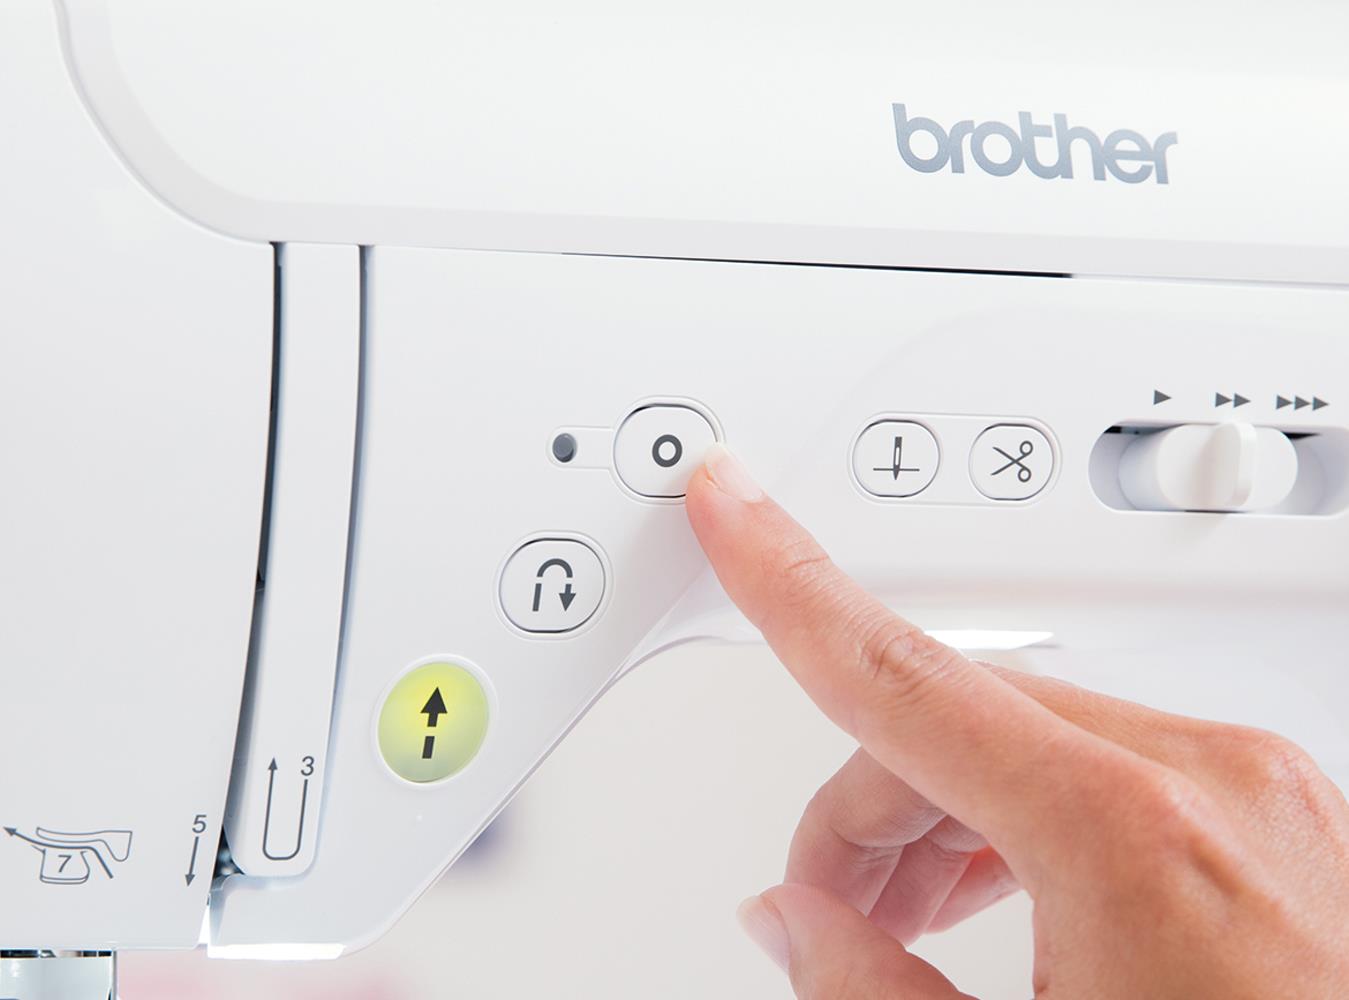 BROTHER Innov-is F580